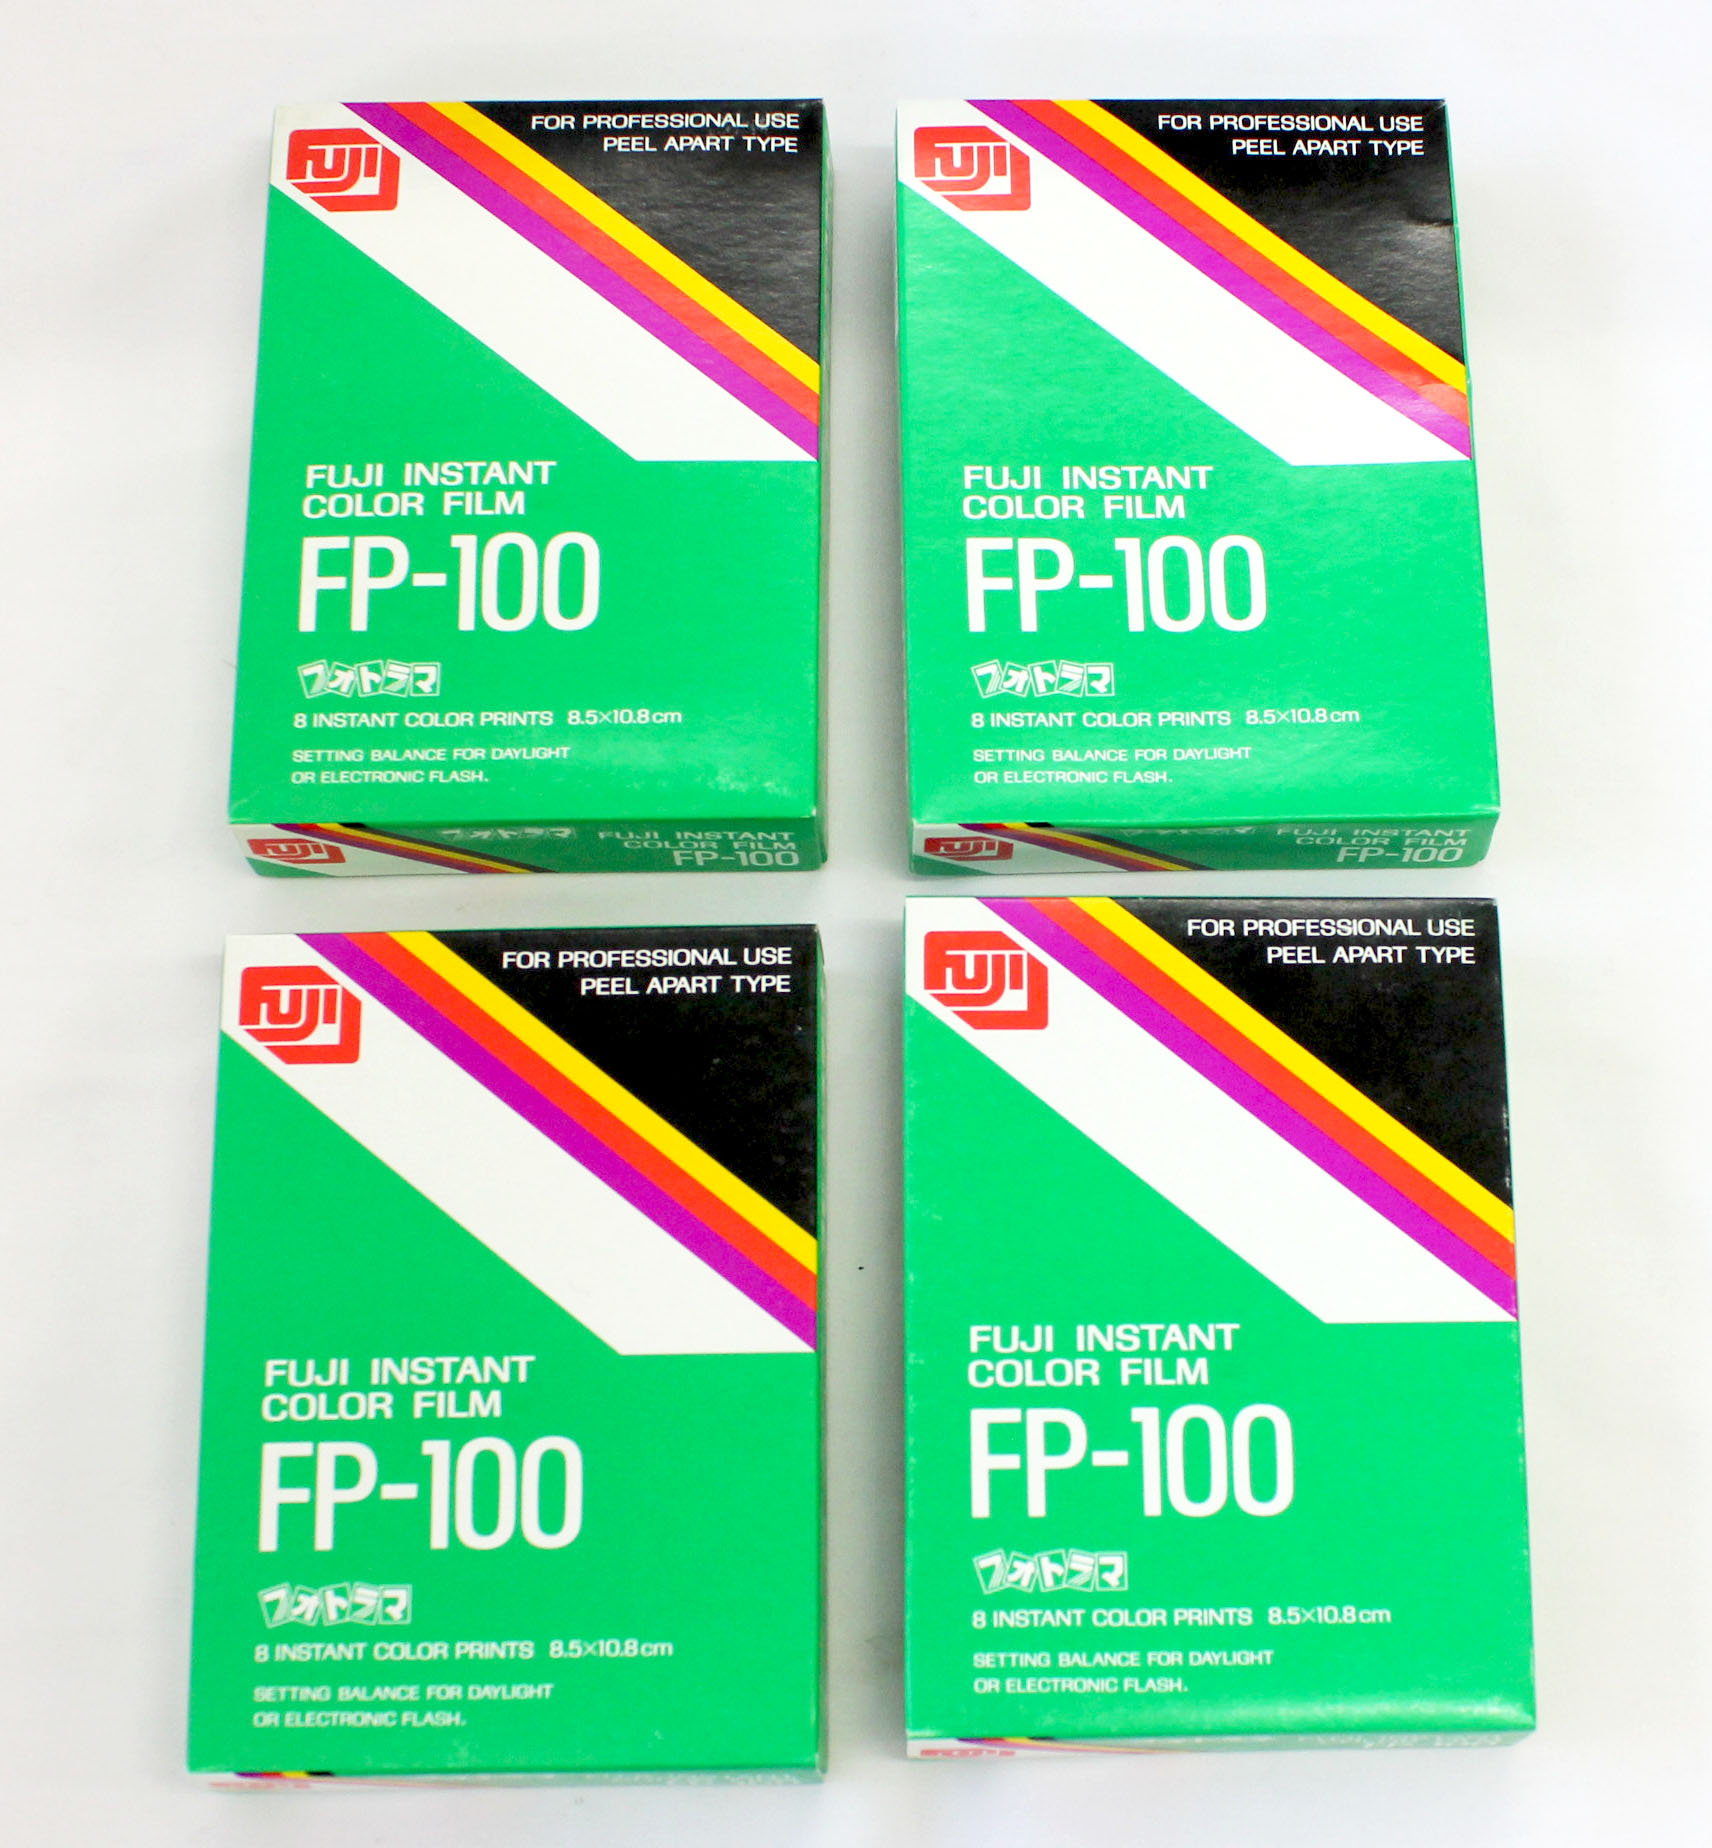 Japan Used Camera Shop | [New] Fujifilm FP-100 C Instant Color Film Set of 4 (Exp 1989) from Japan